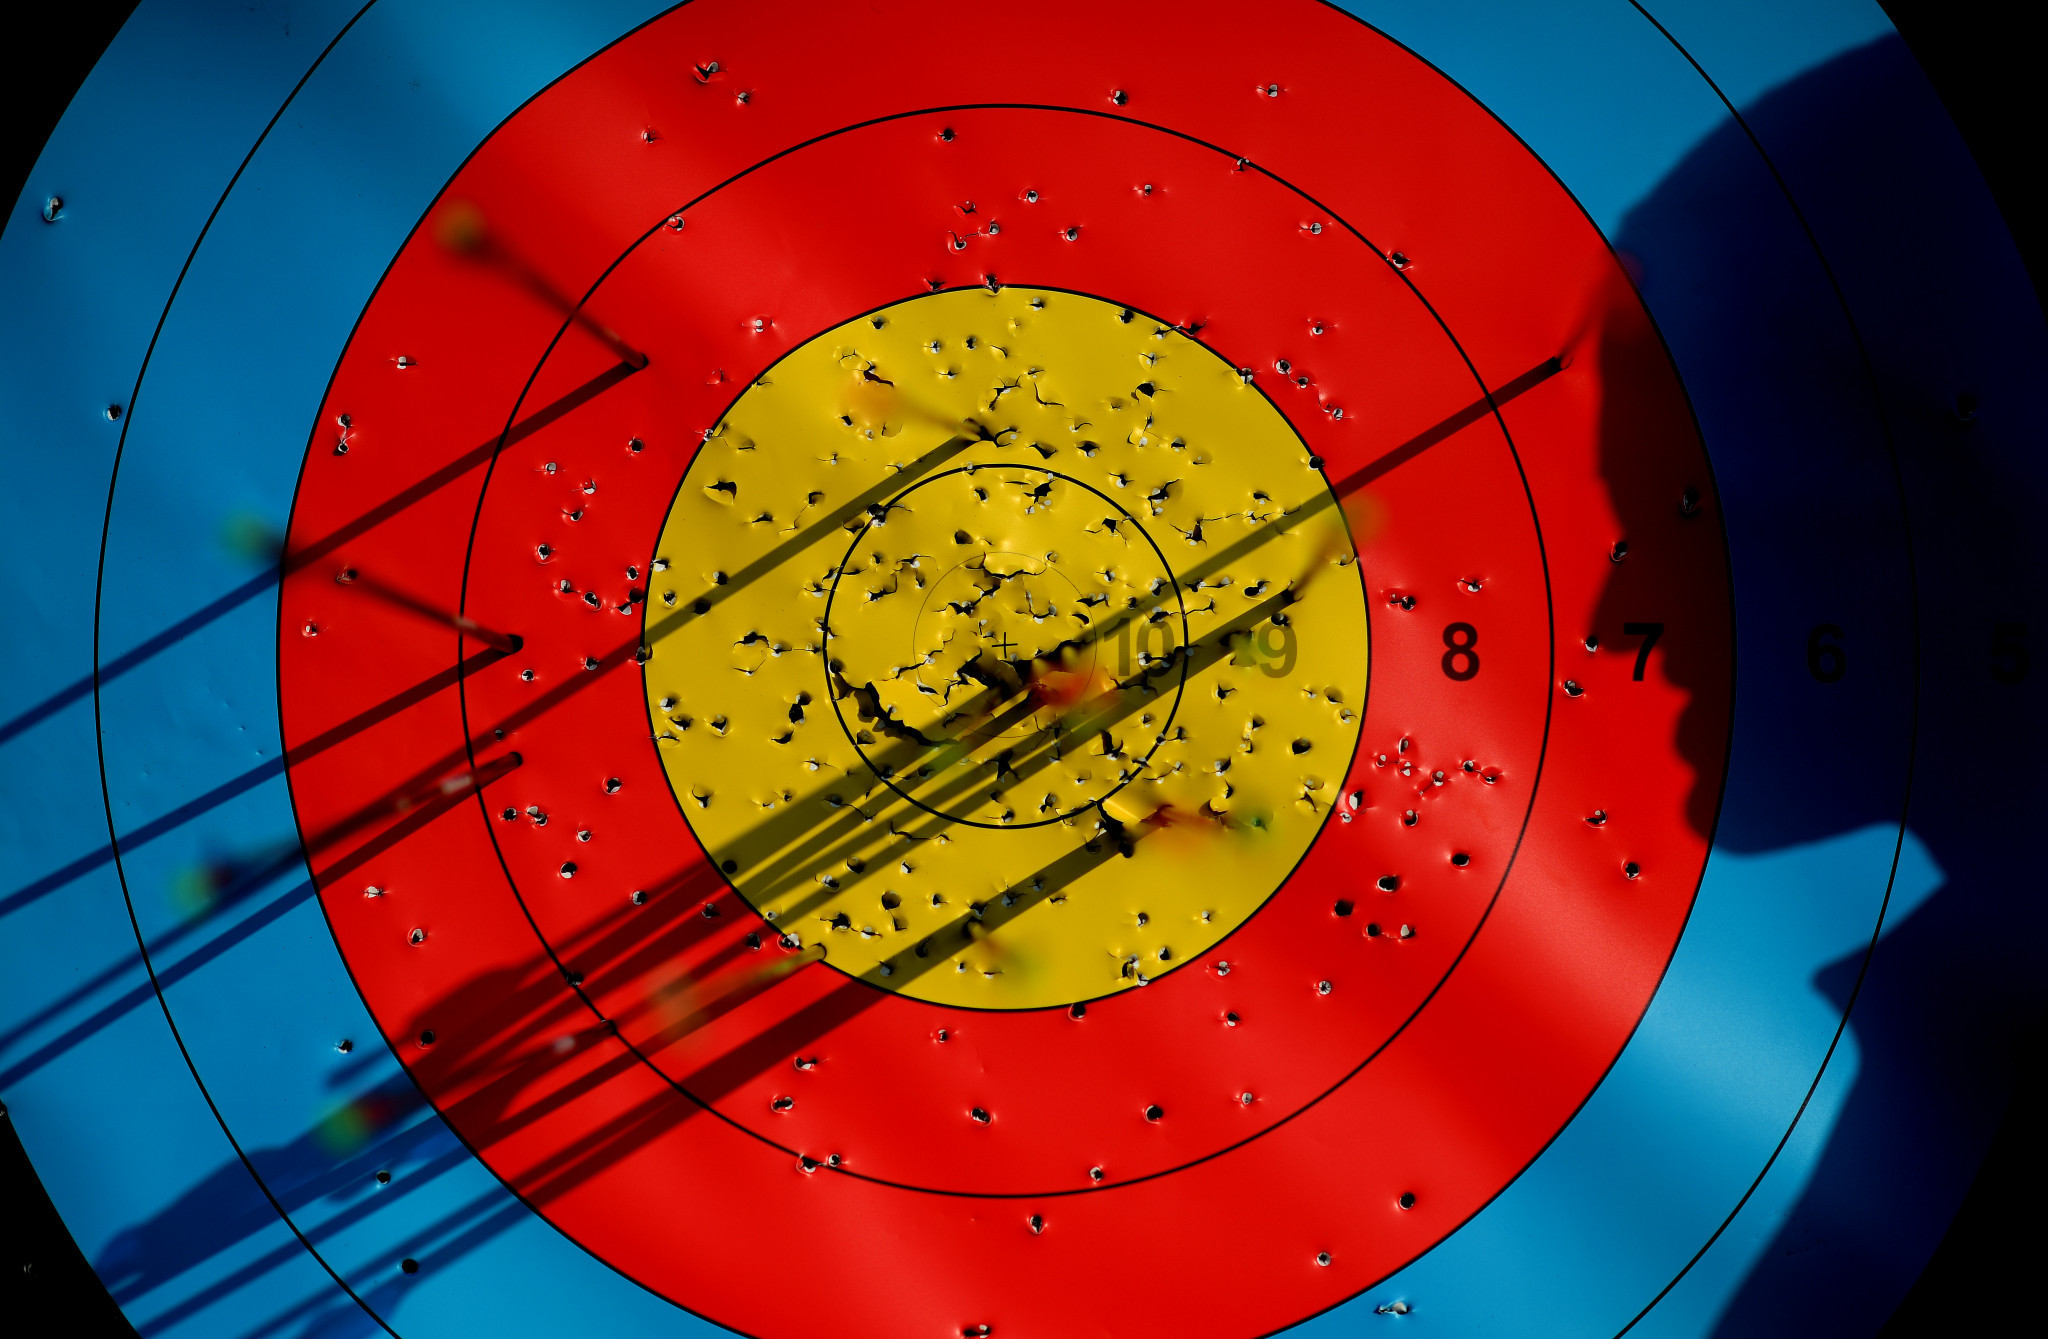 Team opening rounds take place at World Archery Youth Championships